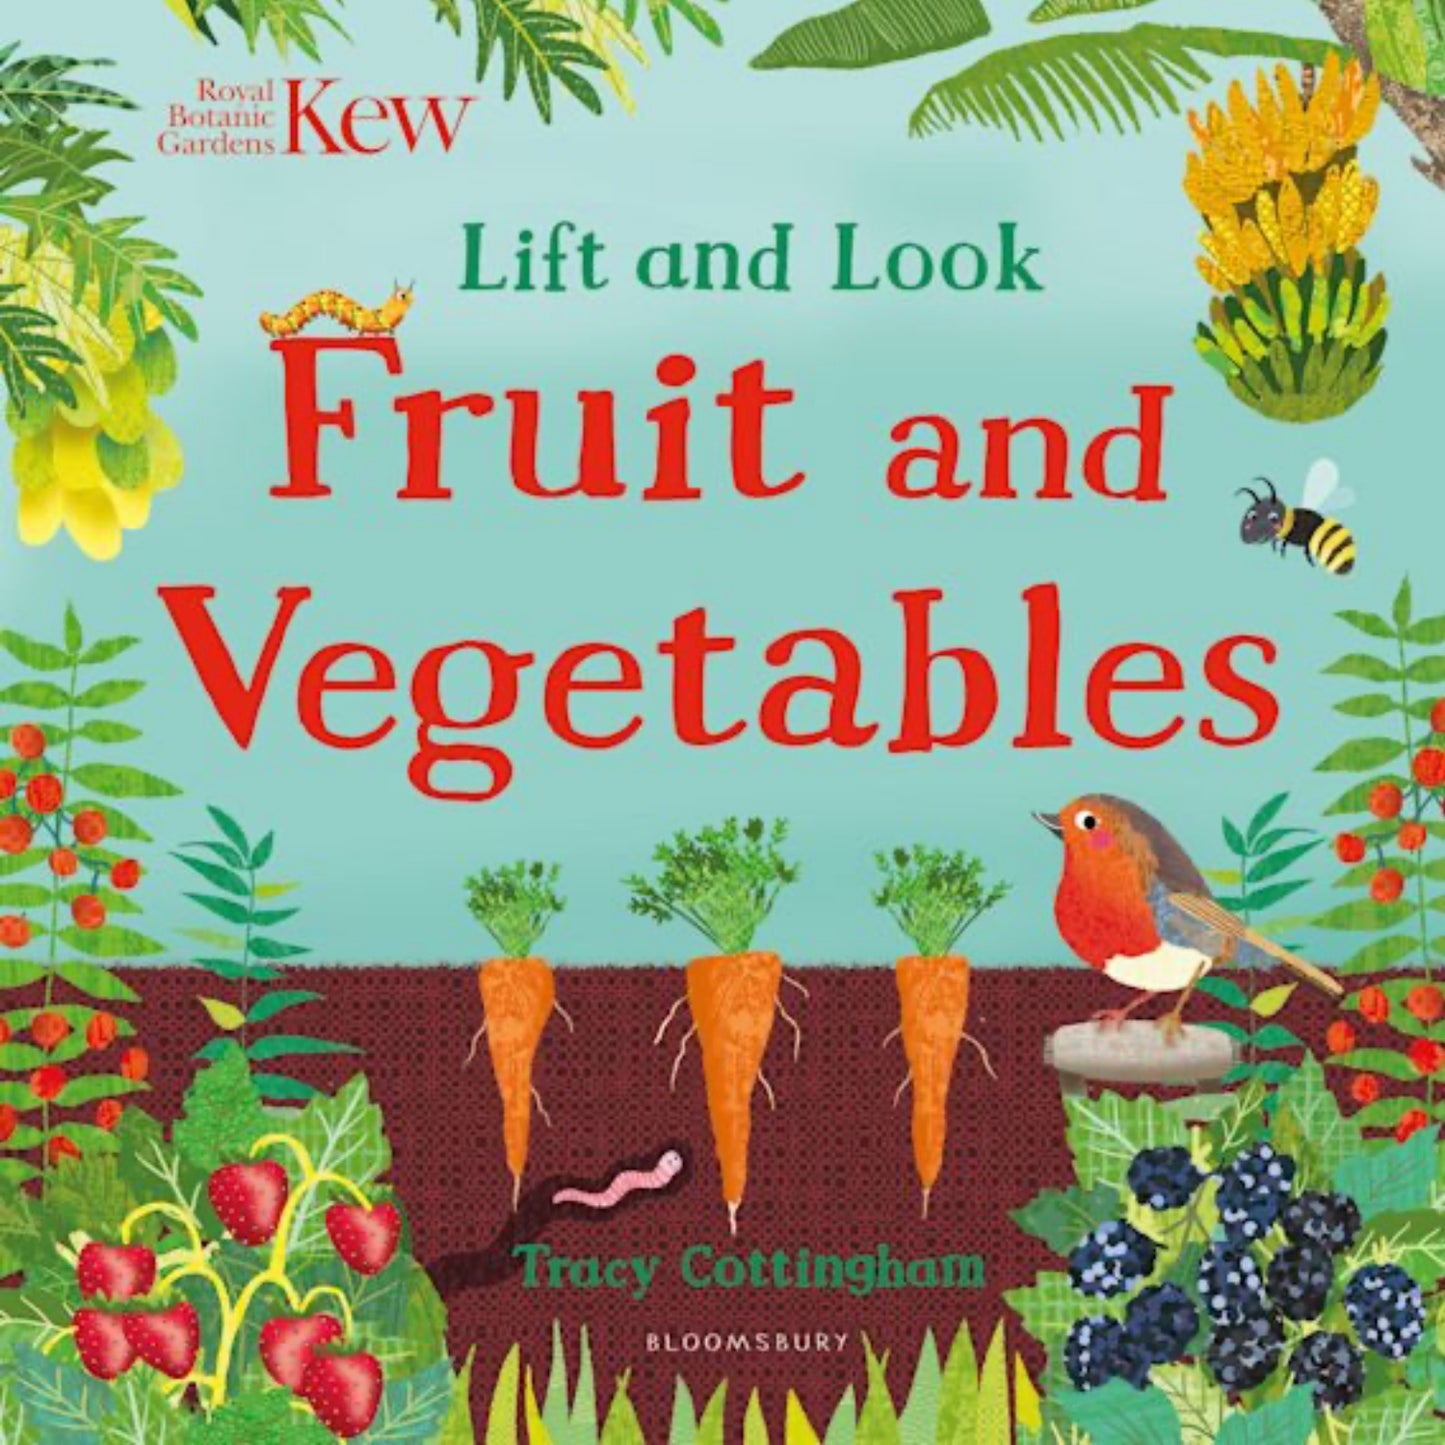 Lift and Look Fruit and Vegetables - Kew | Children's Board Book on Nature